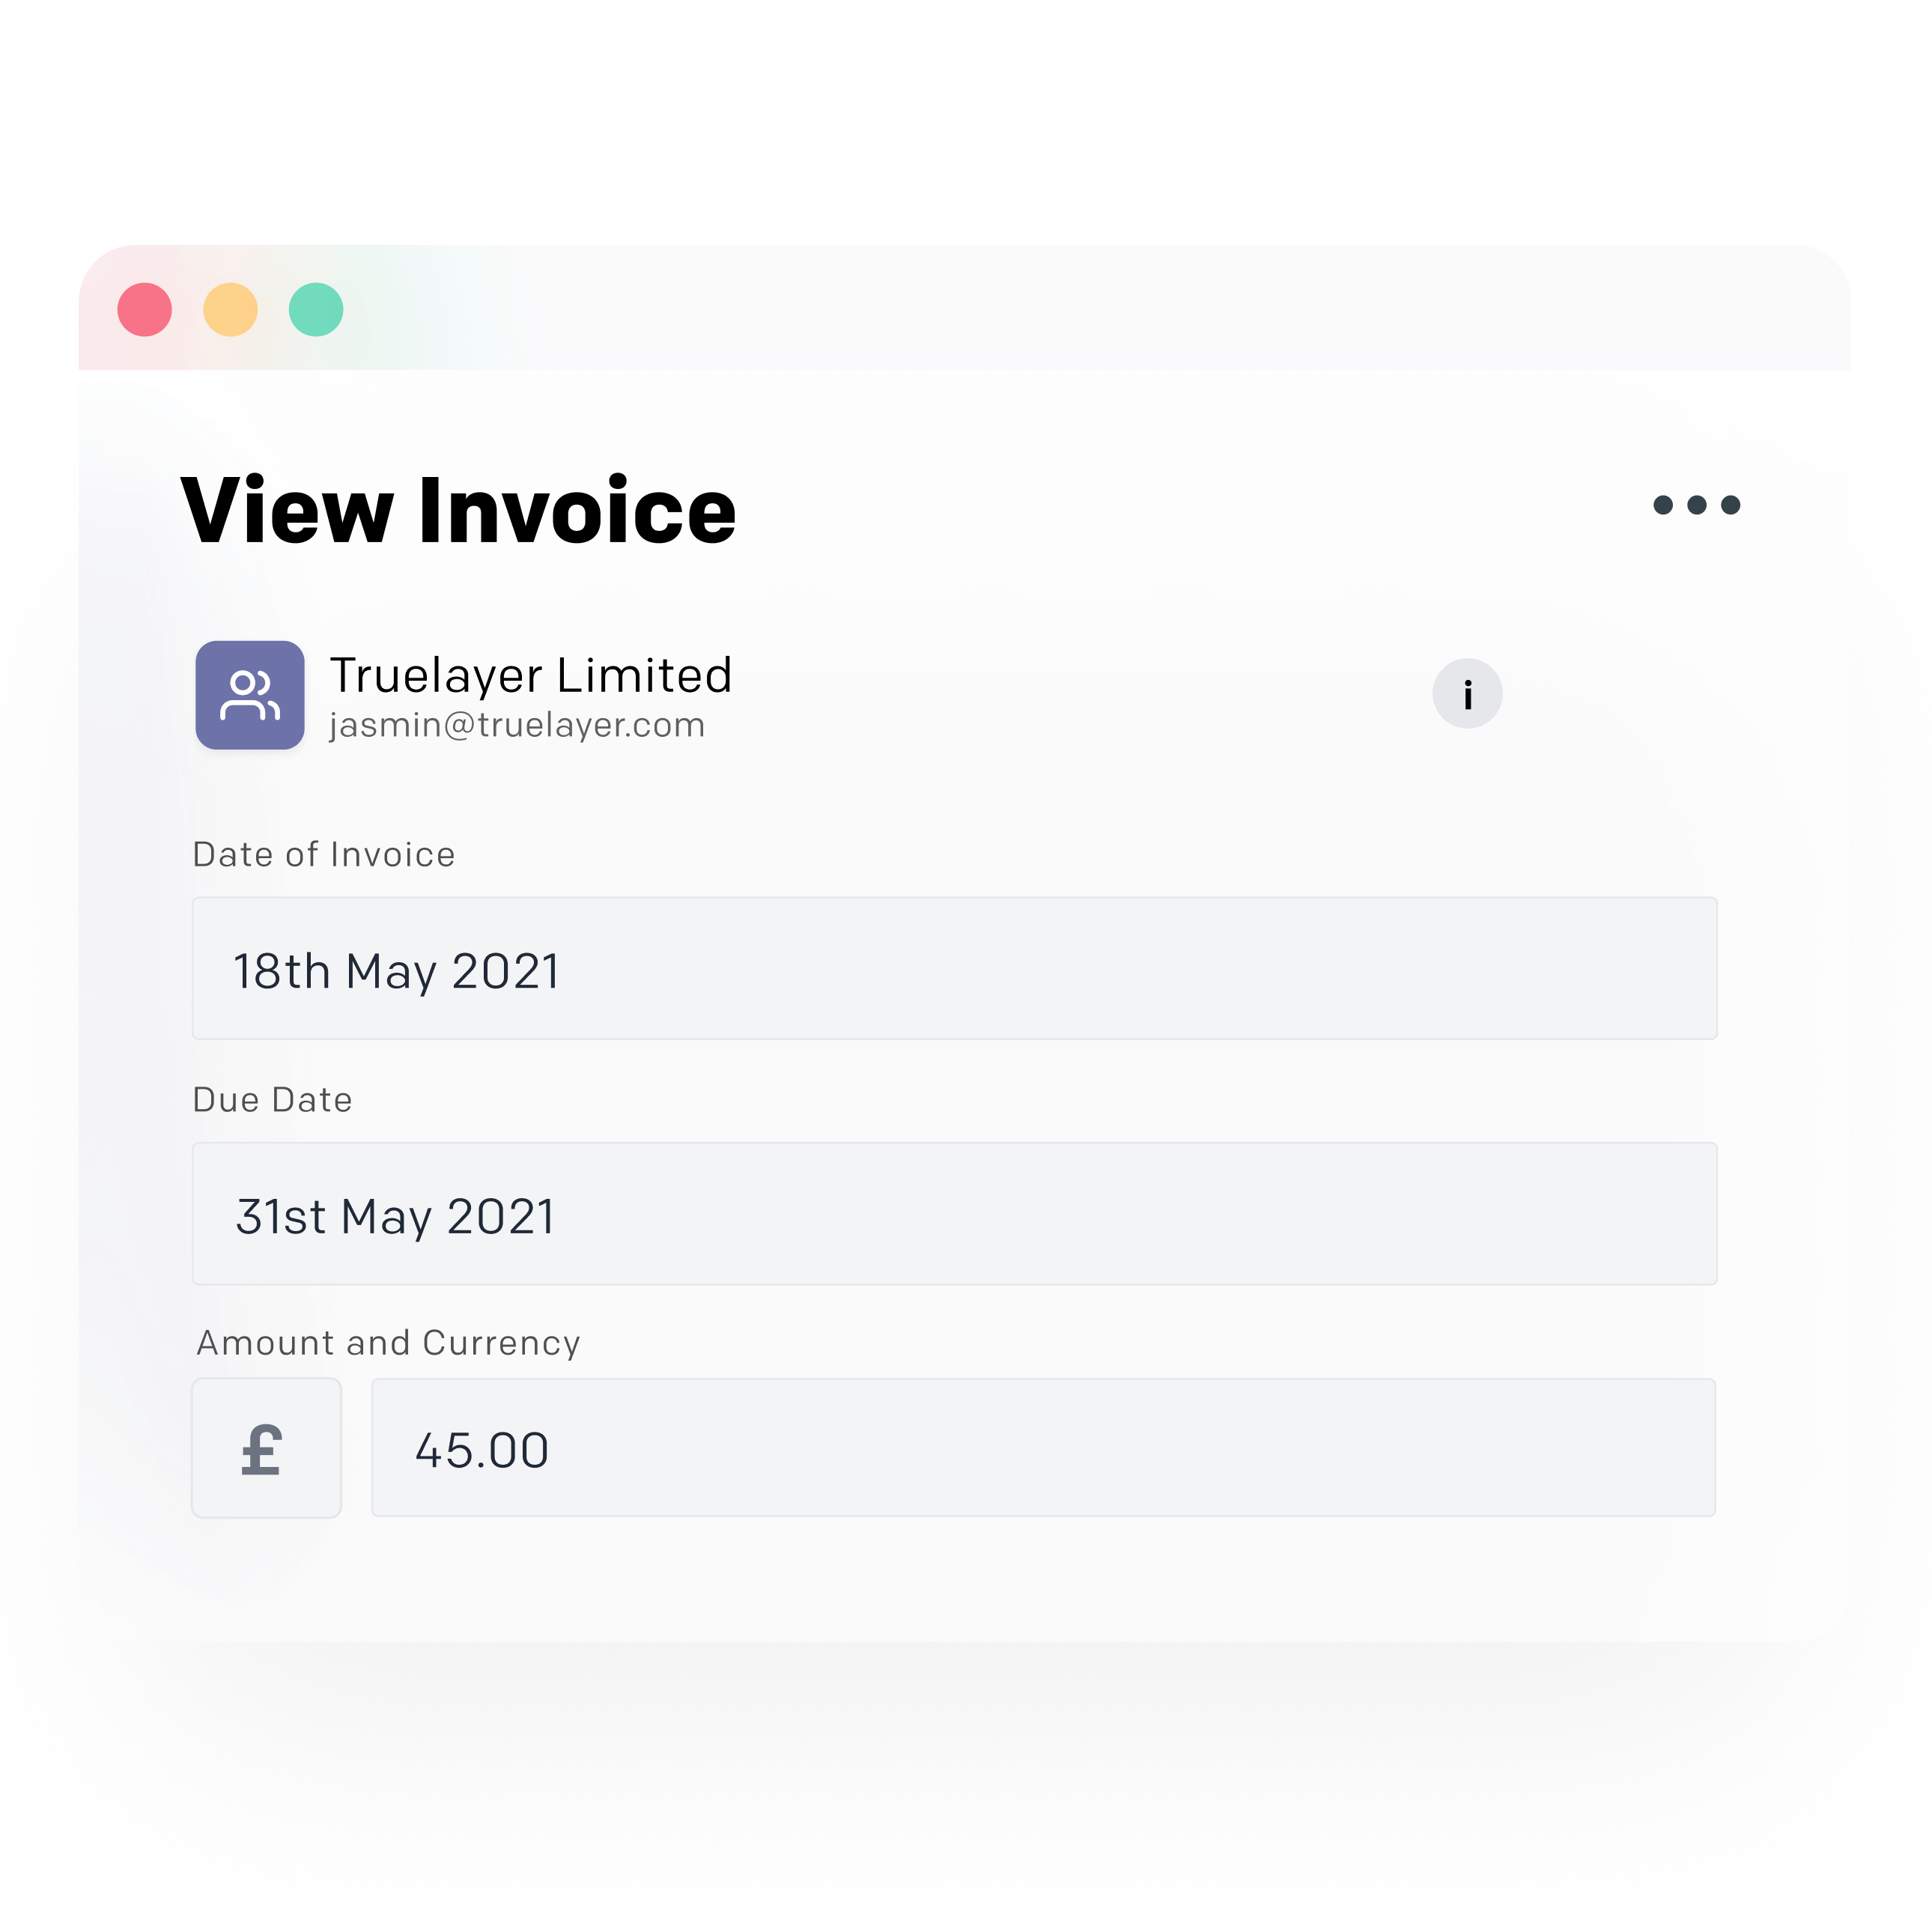 Generate invoices in just a few clicks